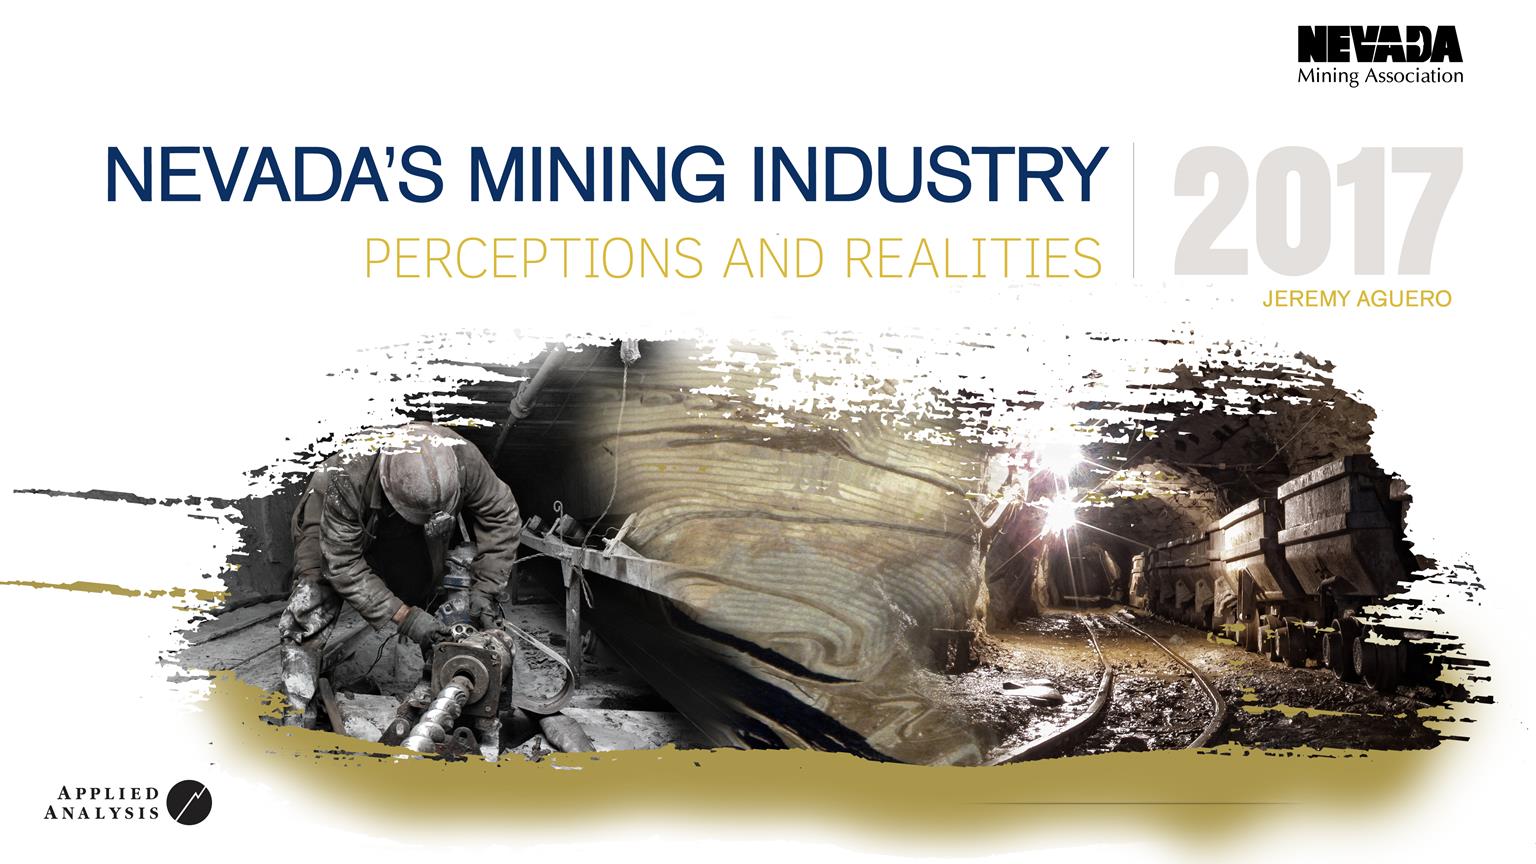 Nevada's Mining Industry: Perceptions and Realitites